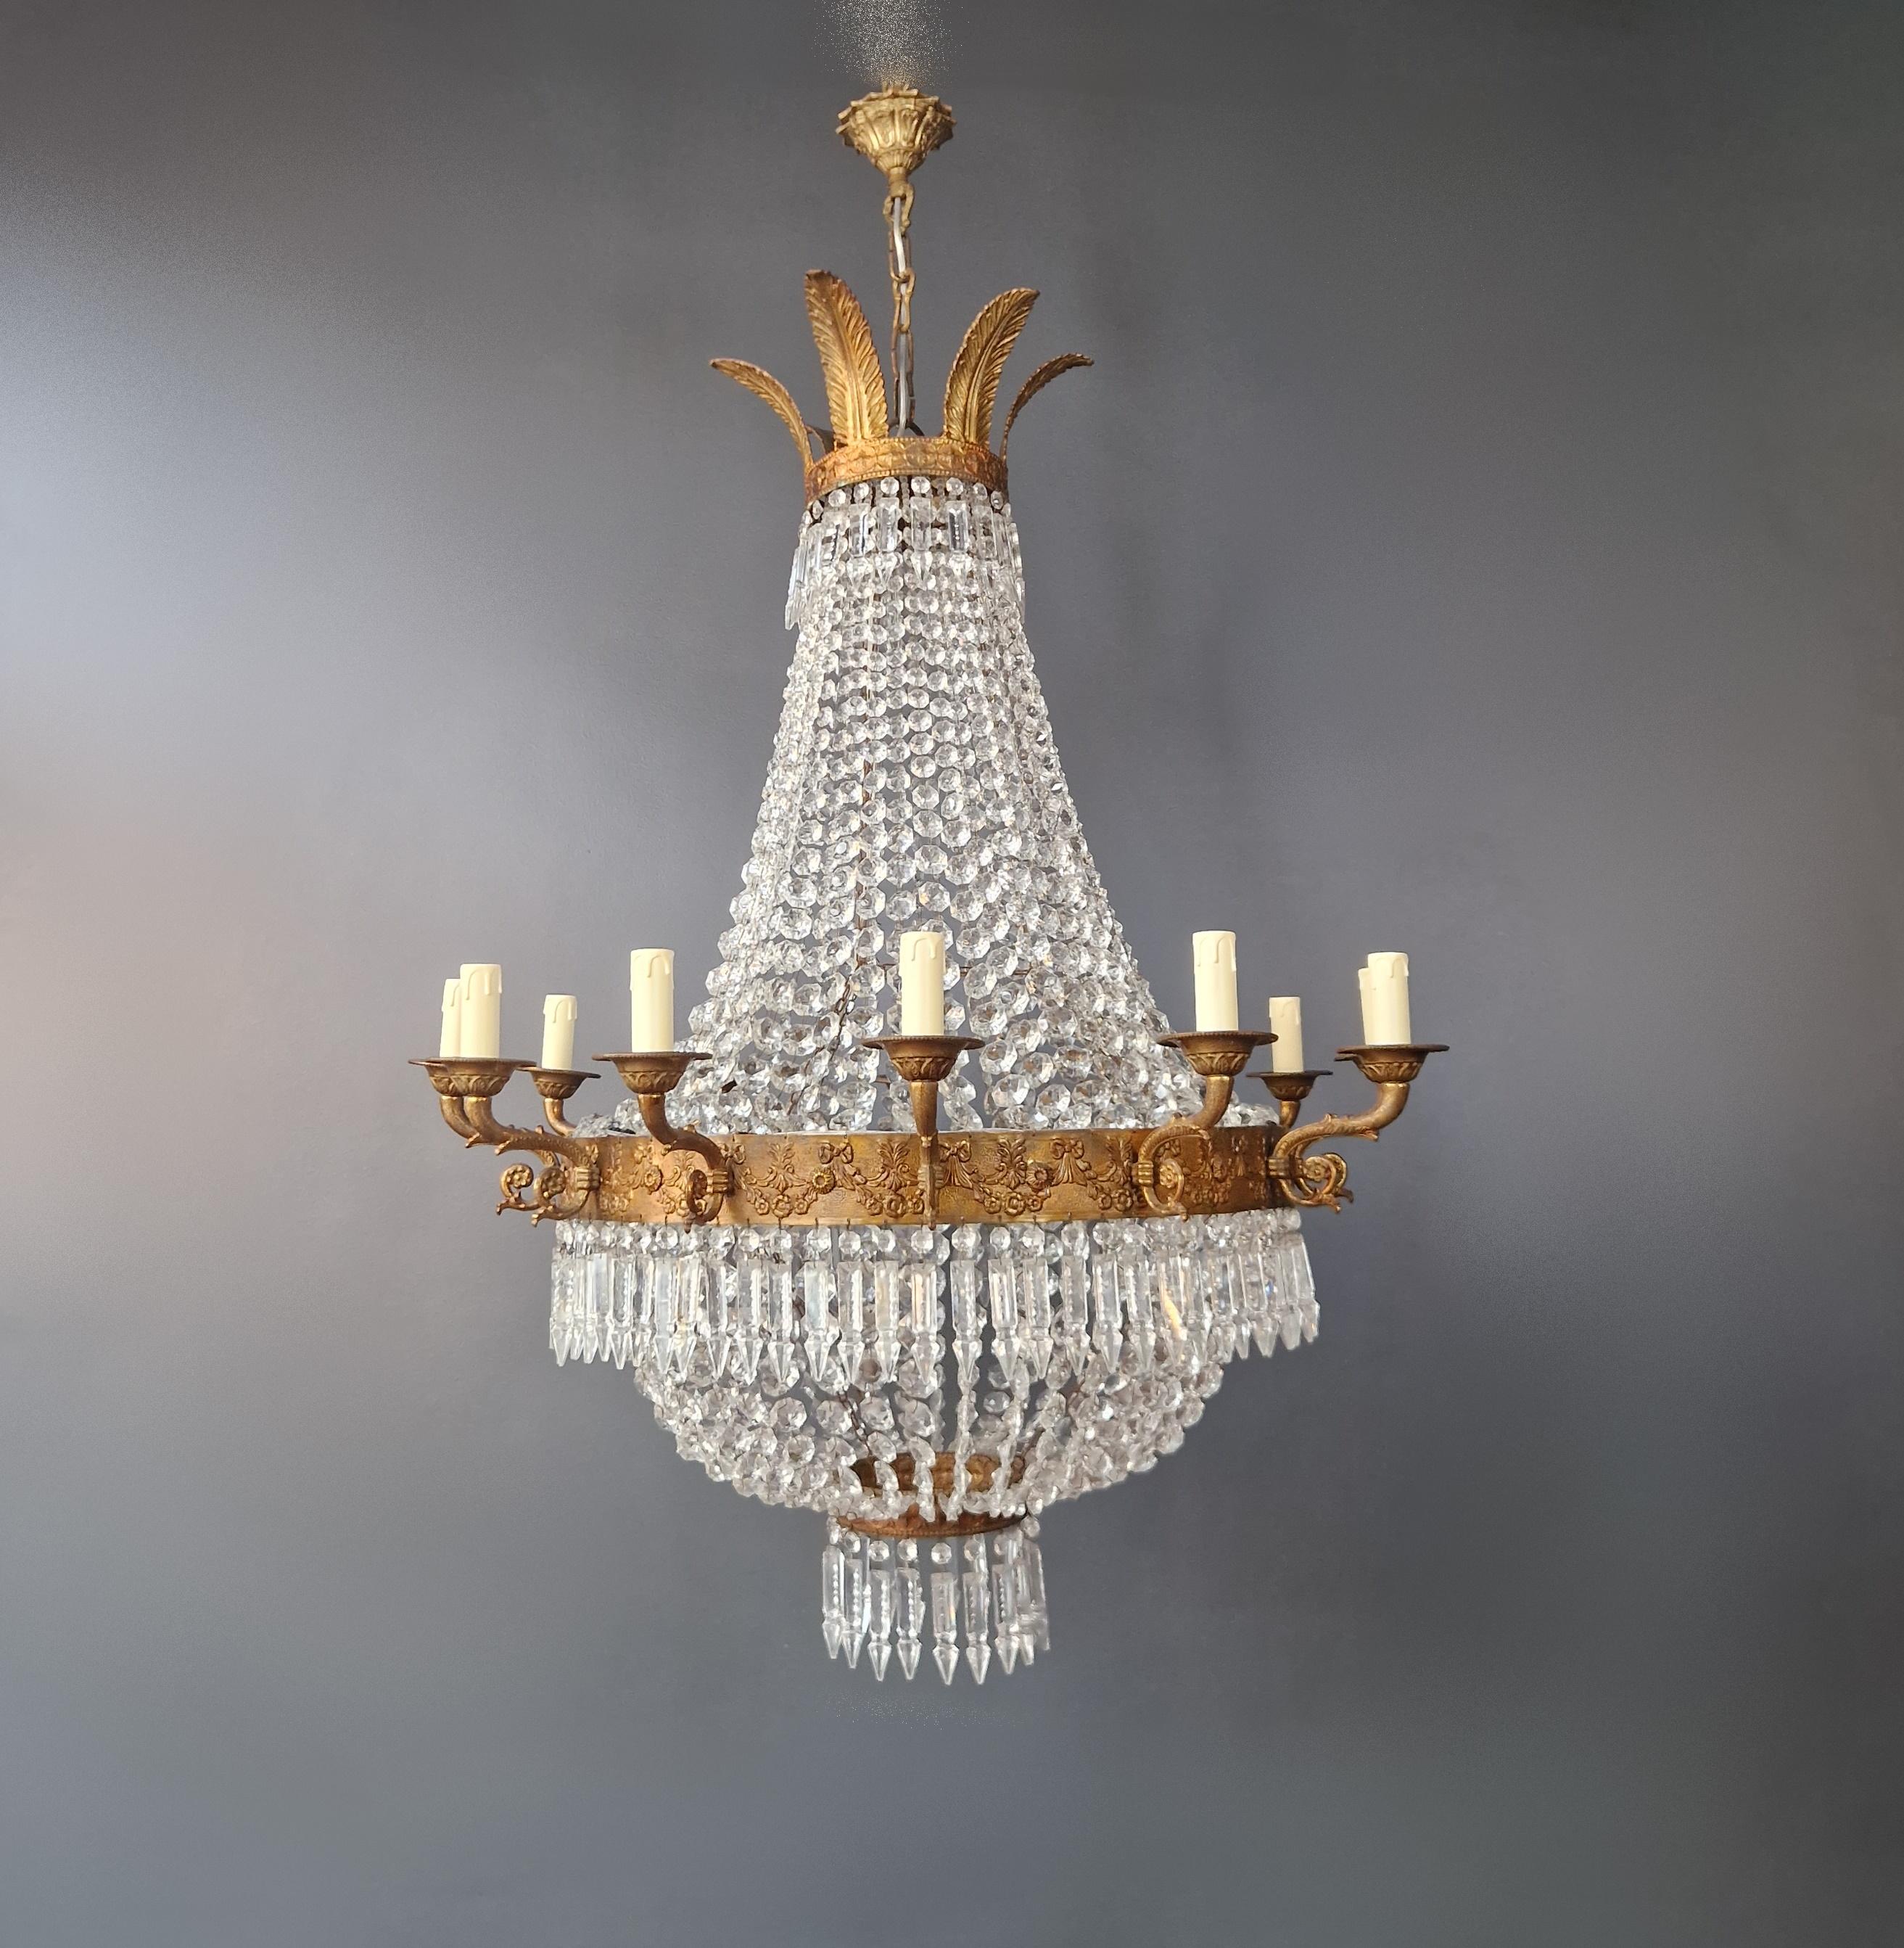 Empire Brass Chandelier Crystal Lustre Ceiling Light Antique Classical 2